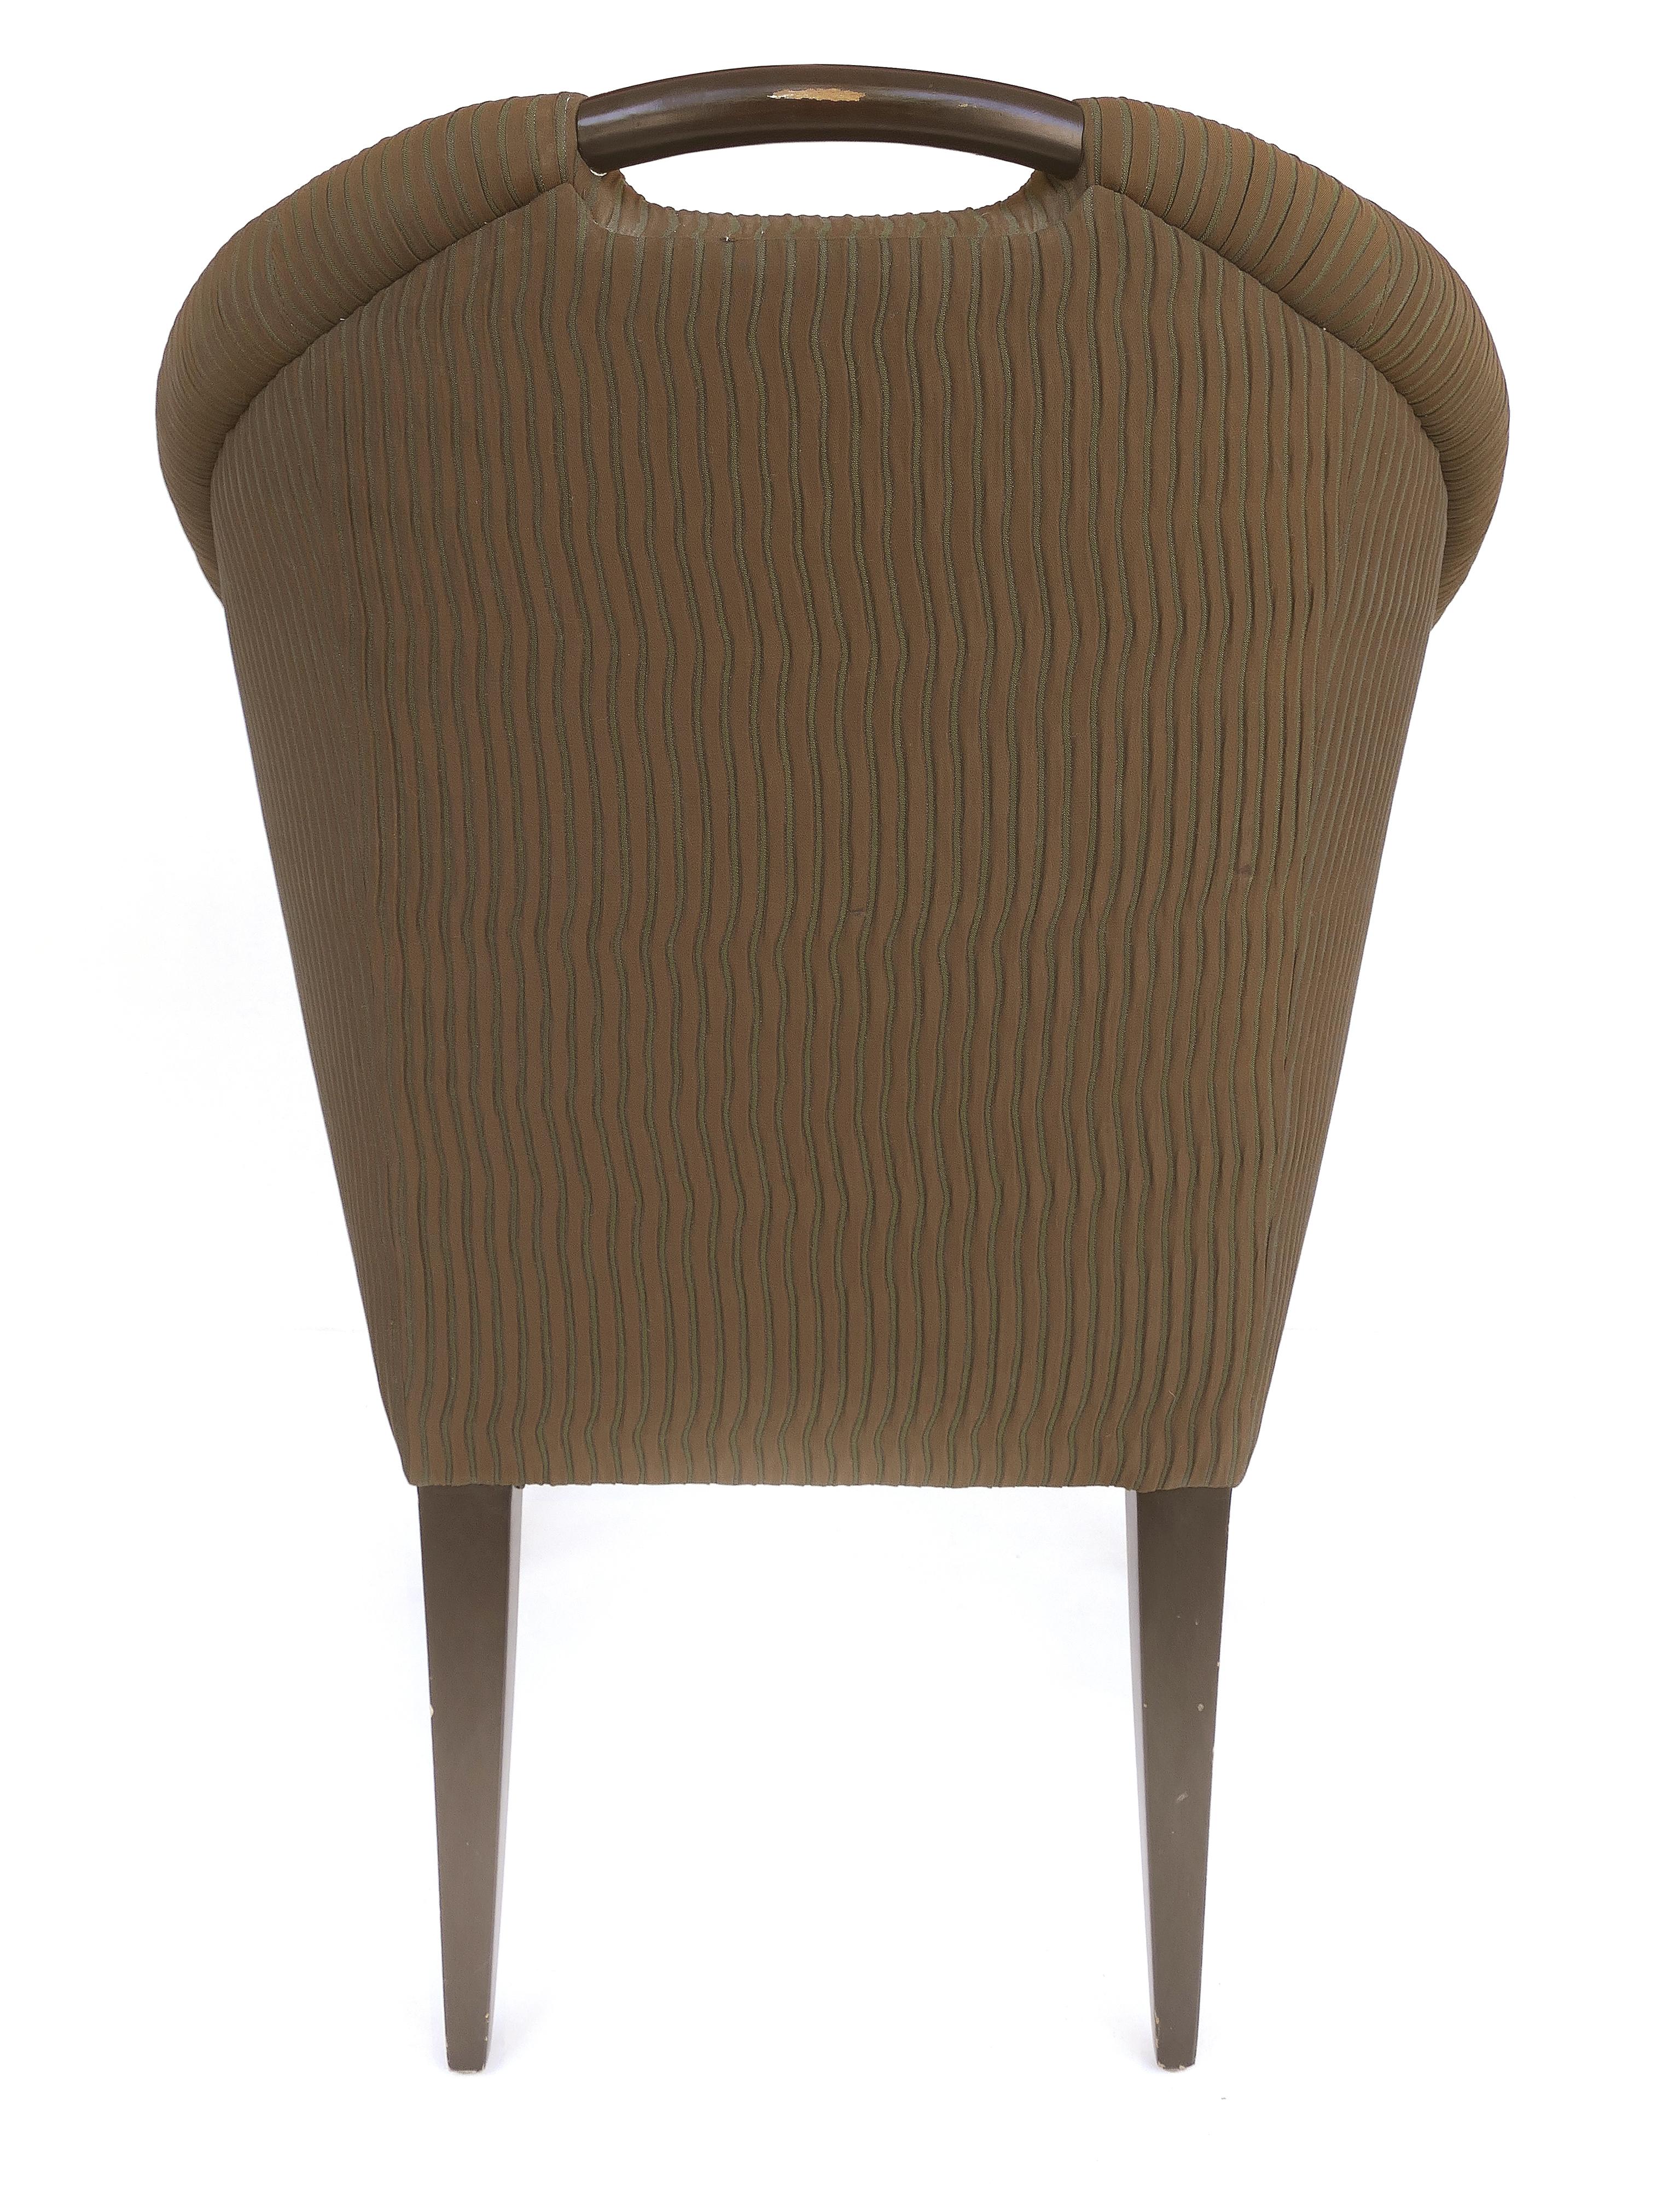 Contemporary Donghia Upholstered Club Chairs with Wood Handles